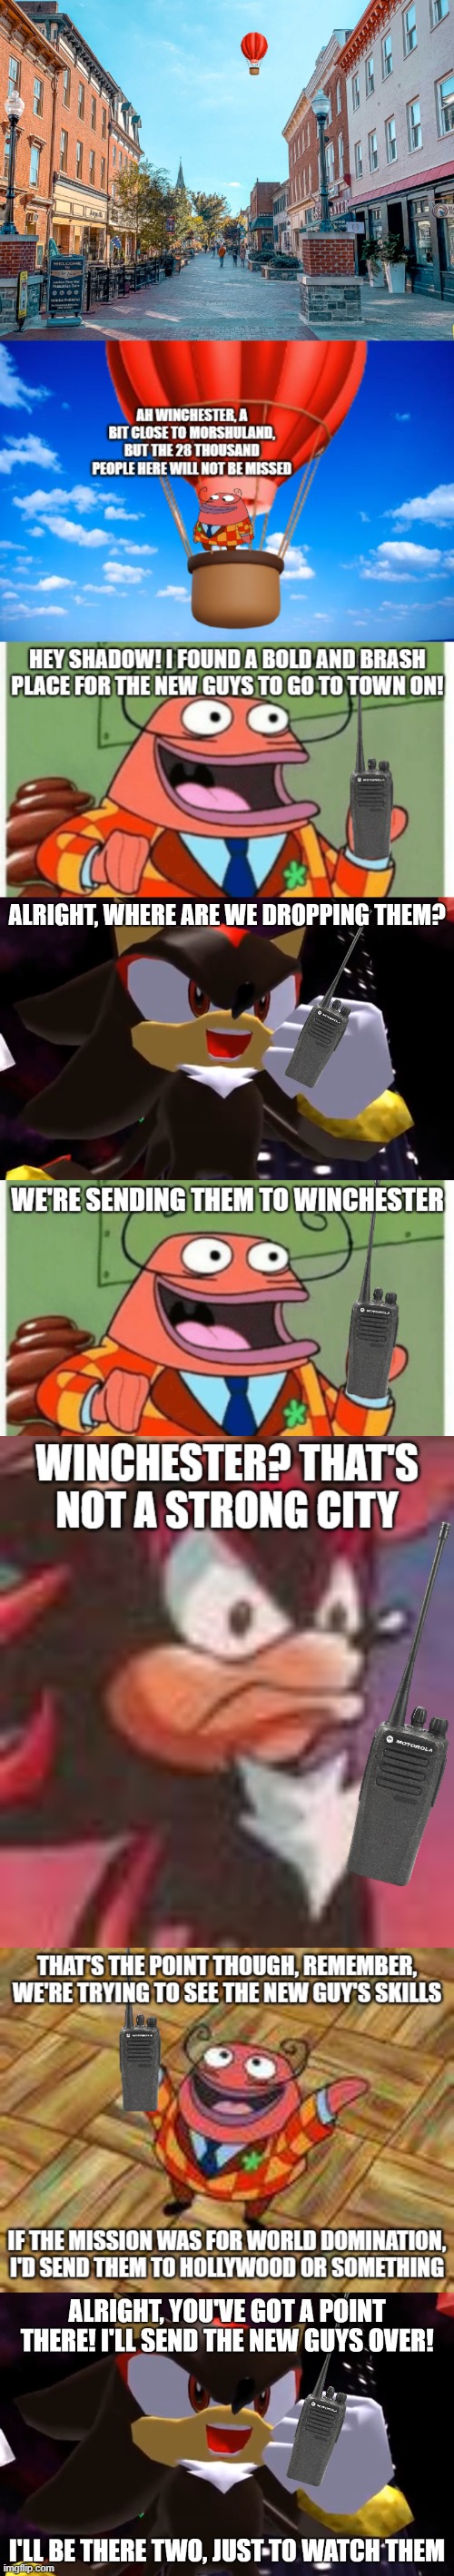 Winchester Attack Prolouge | made w/ Imgflip meme maker